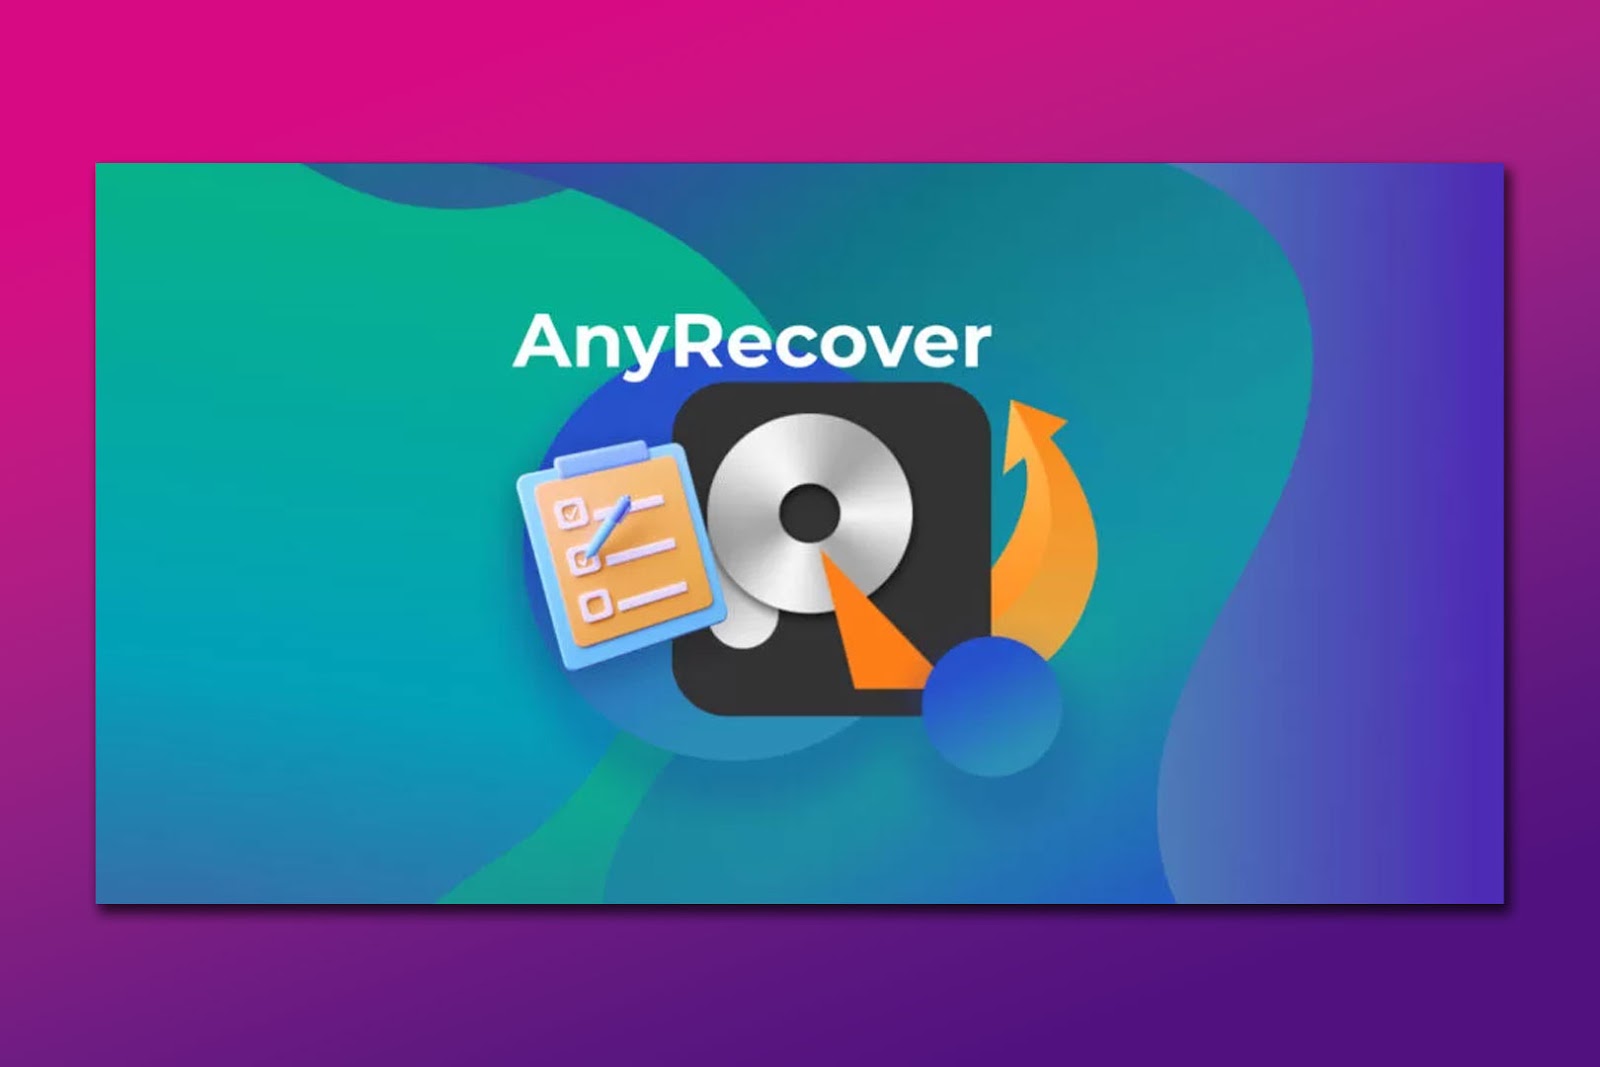 AnyRecover - Recover Snapchat Messages on iPhone